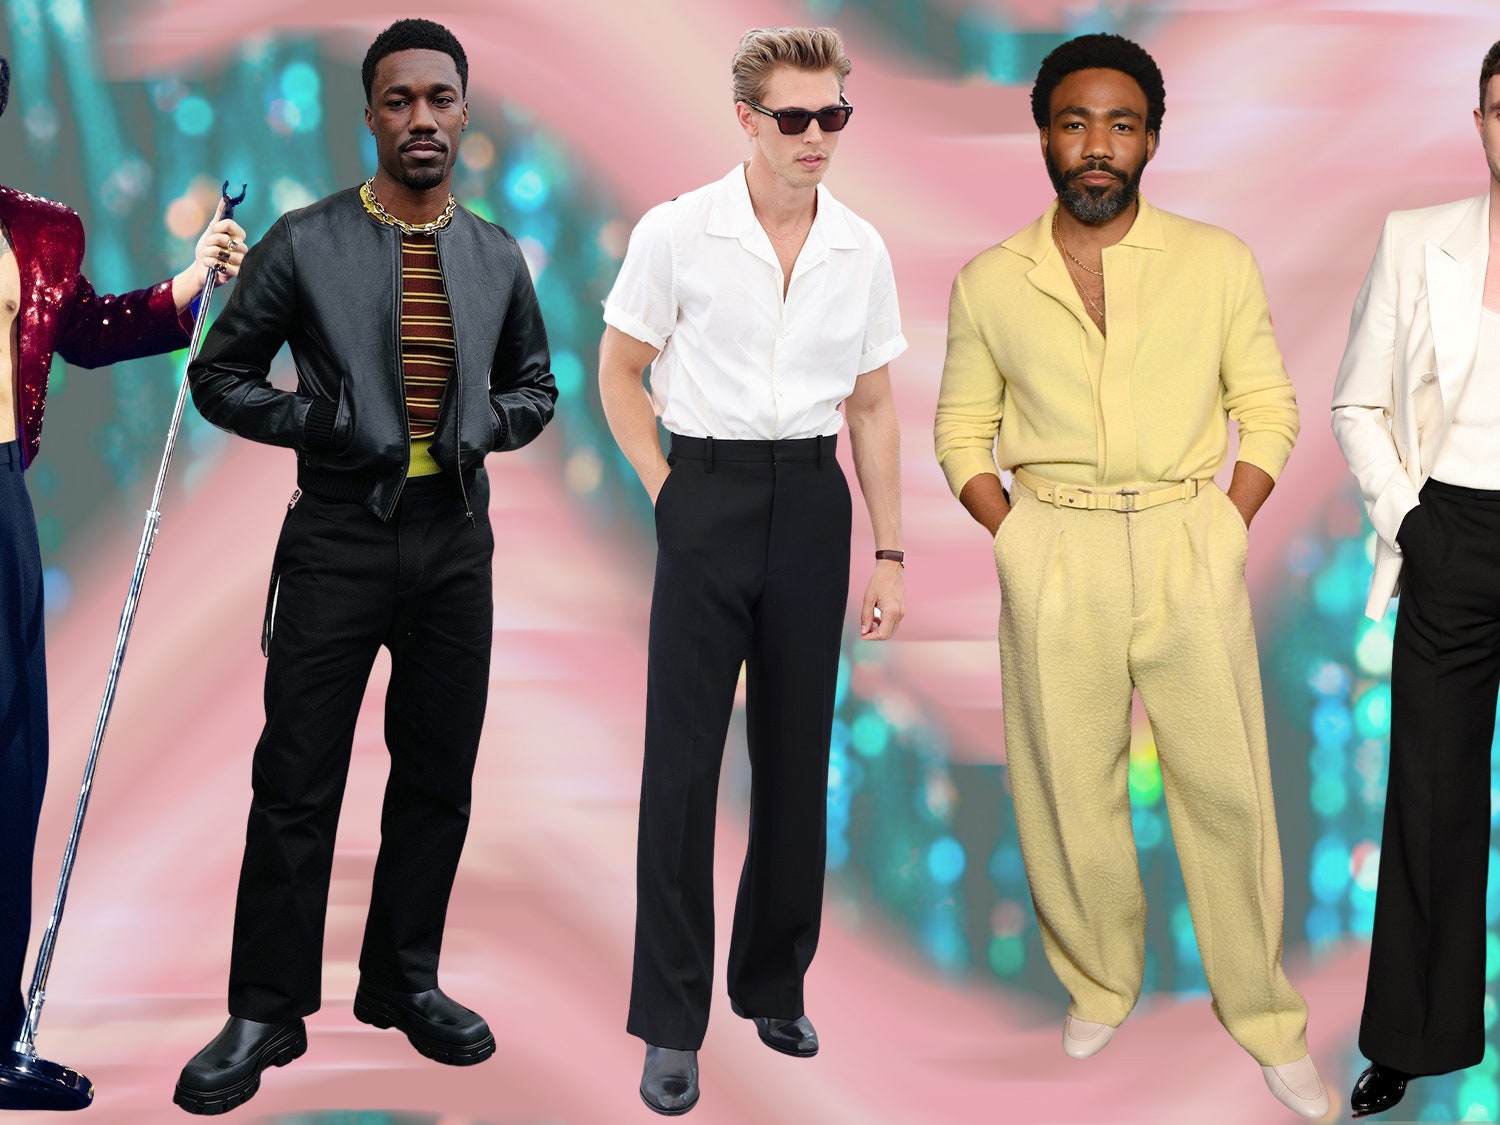 The Best Men's High Waisted Pants Are on the Rise